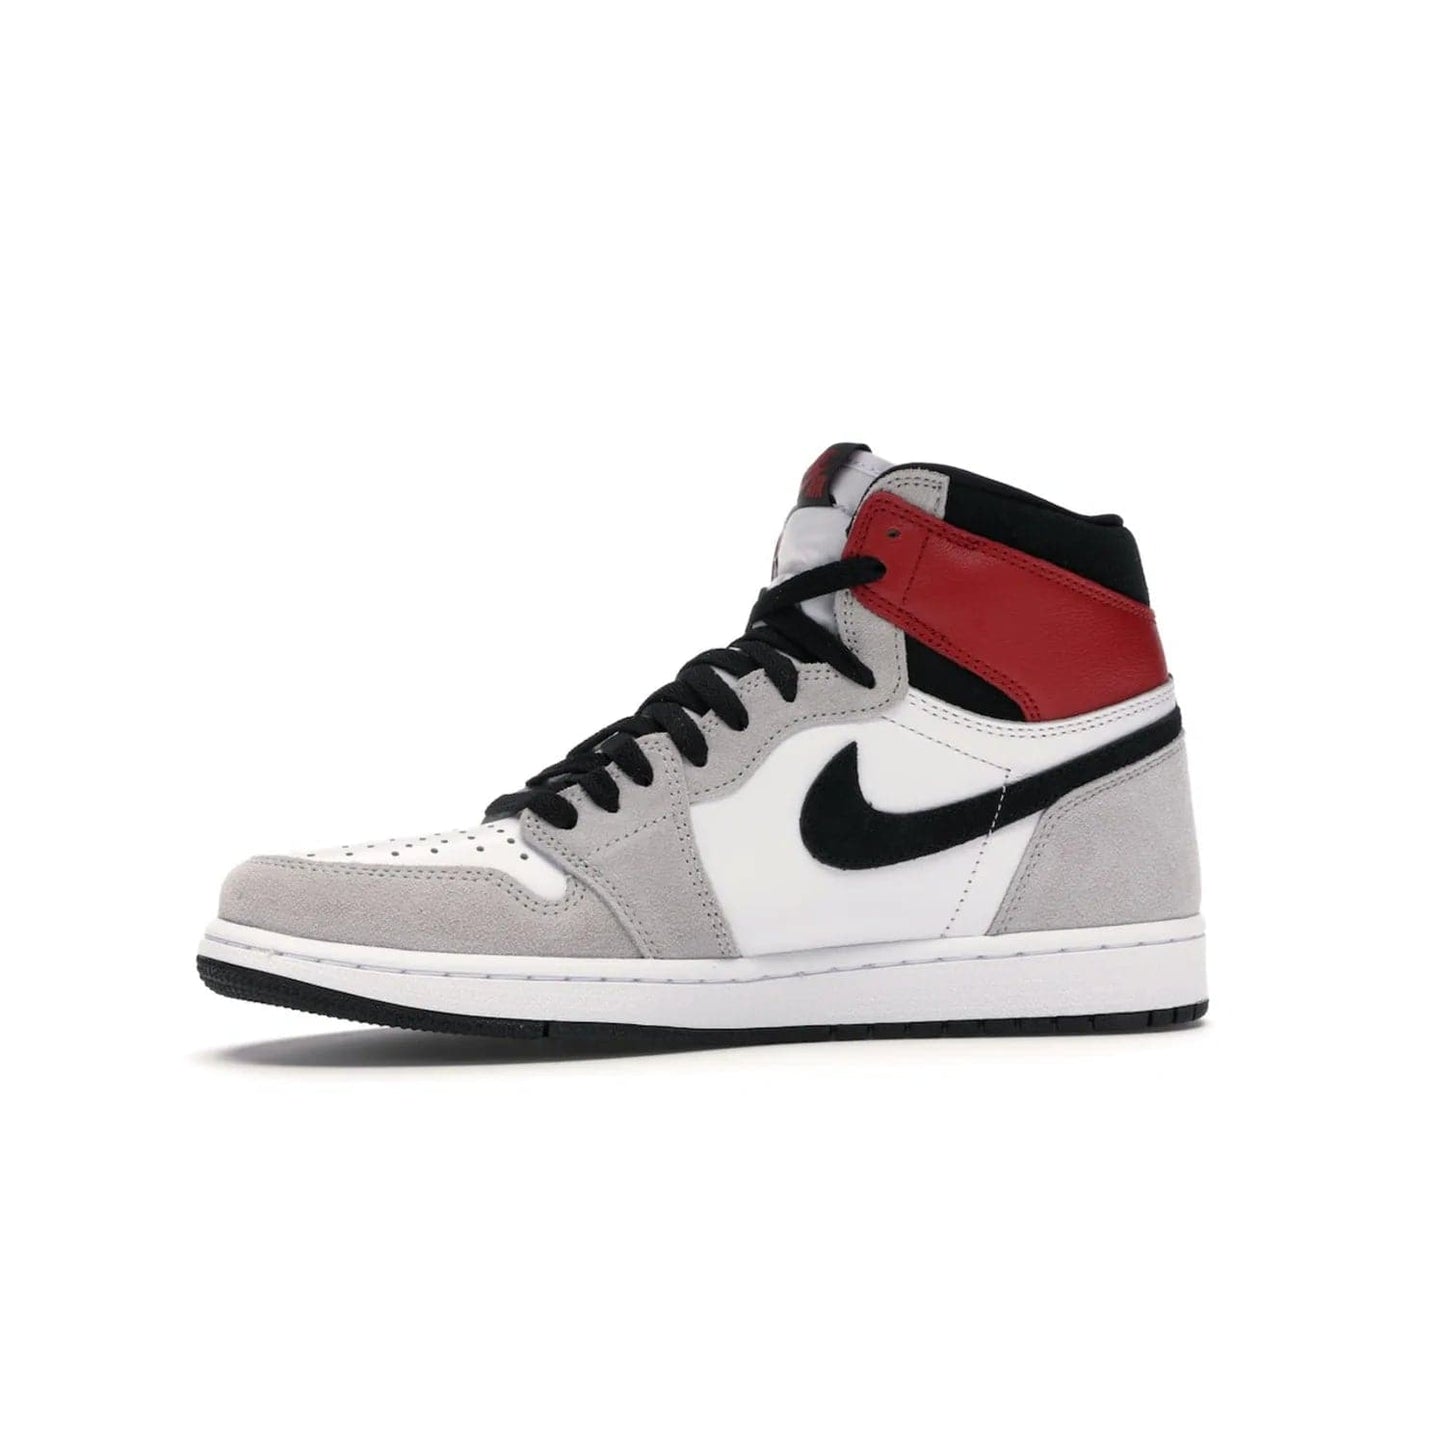 Jordan 1 Retro High Light Smoke Grey - Image 17 - Only at www.BallersClubKickz.com - Comfortable and stylish, Jordan 1 Retro High Light Smoke Grey offers a unique spin on a classic design. White leather, grey suede, red leather and black details are set on a white midsole and black outsole. Get the sneaker released in July 2020 and add a twist to your wardrobe.